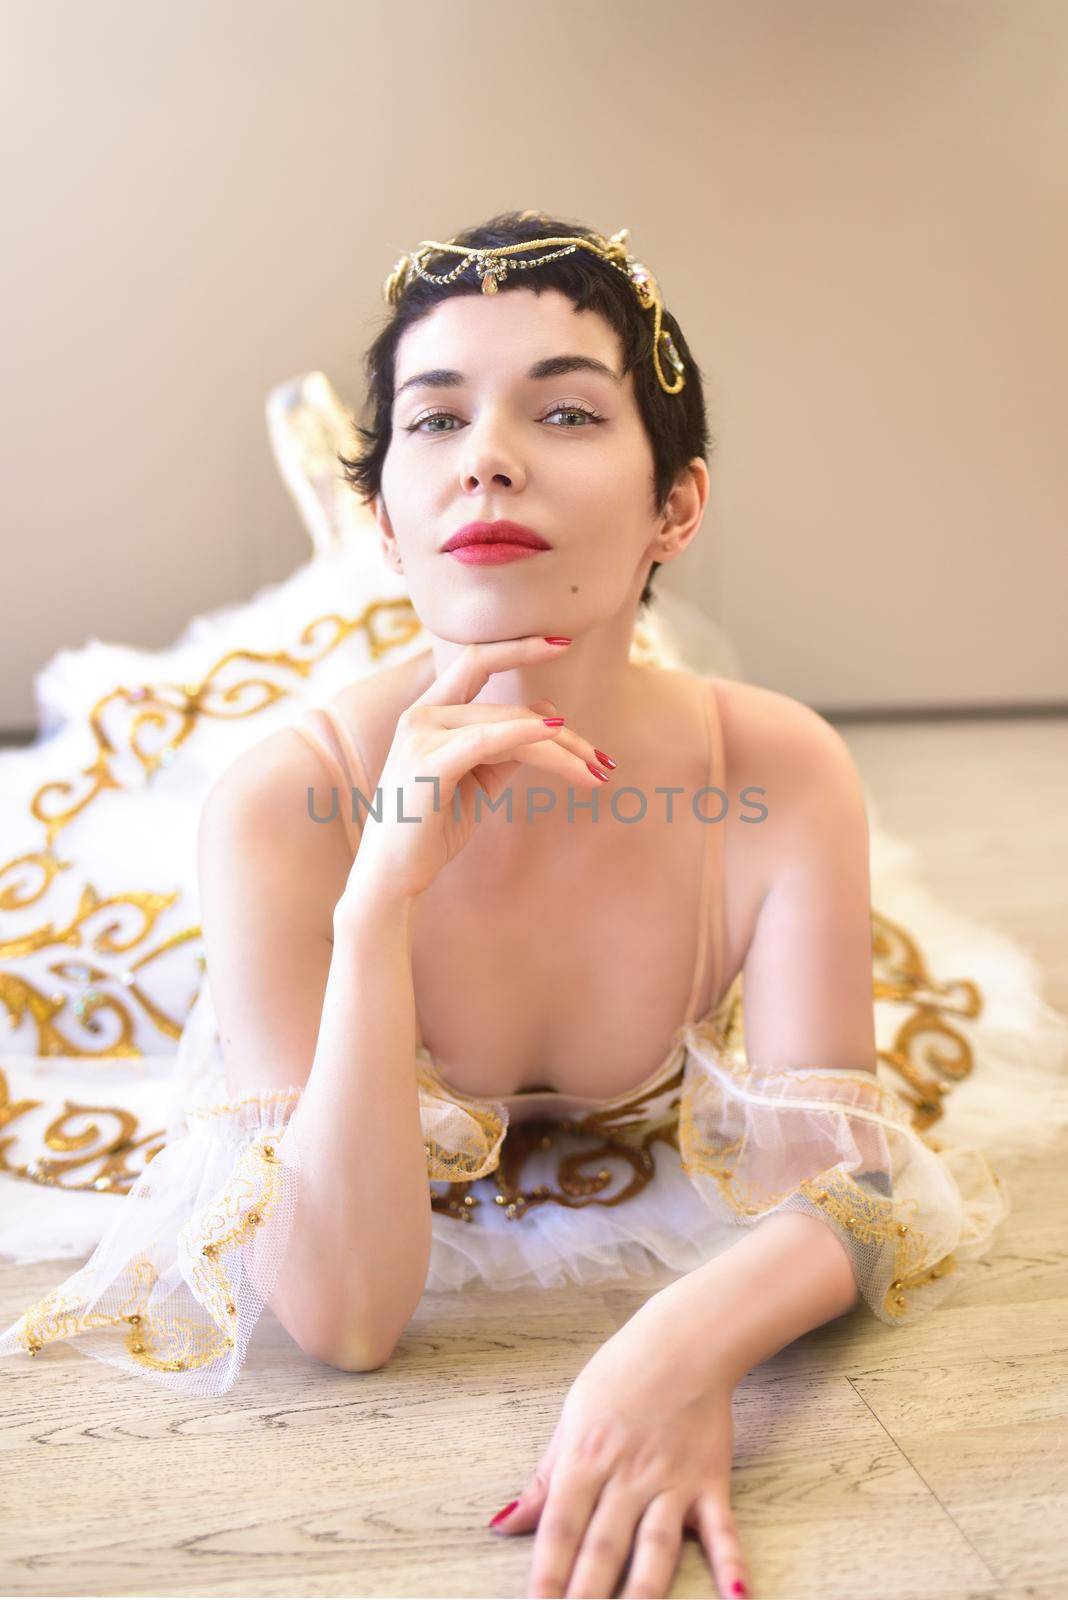 A portrait of a charming ballerina lying on the floor in a ballroom, she touches her chin with her hand and looks flirtatiously at the camera